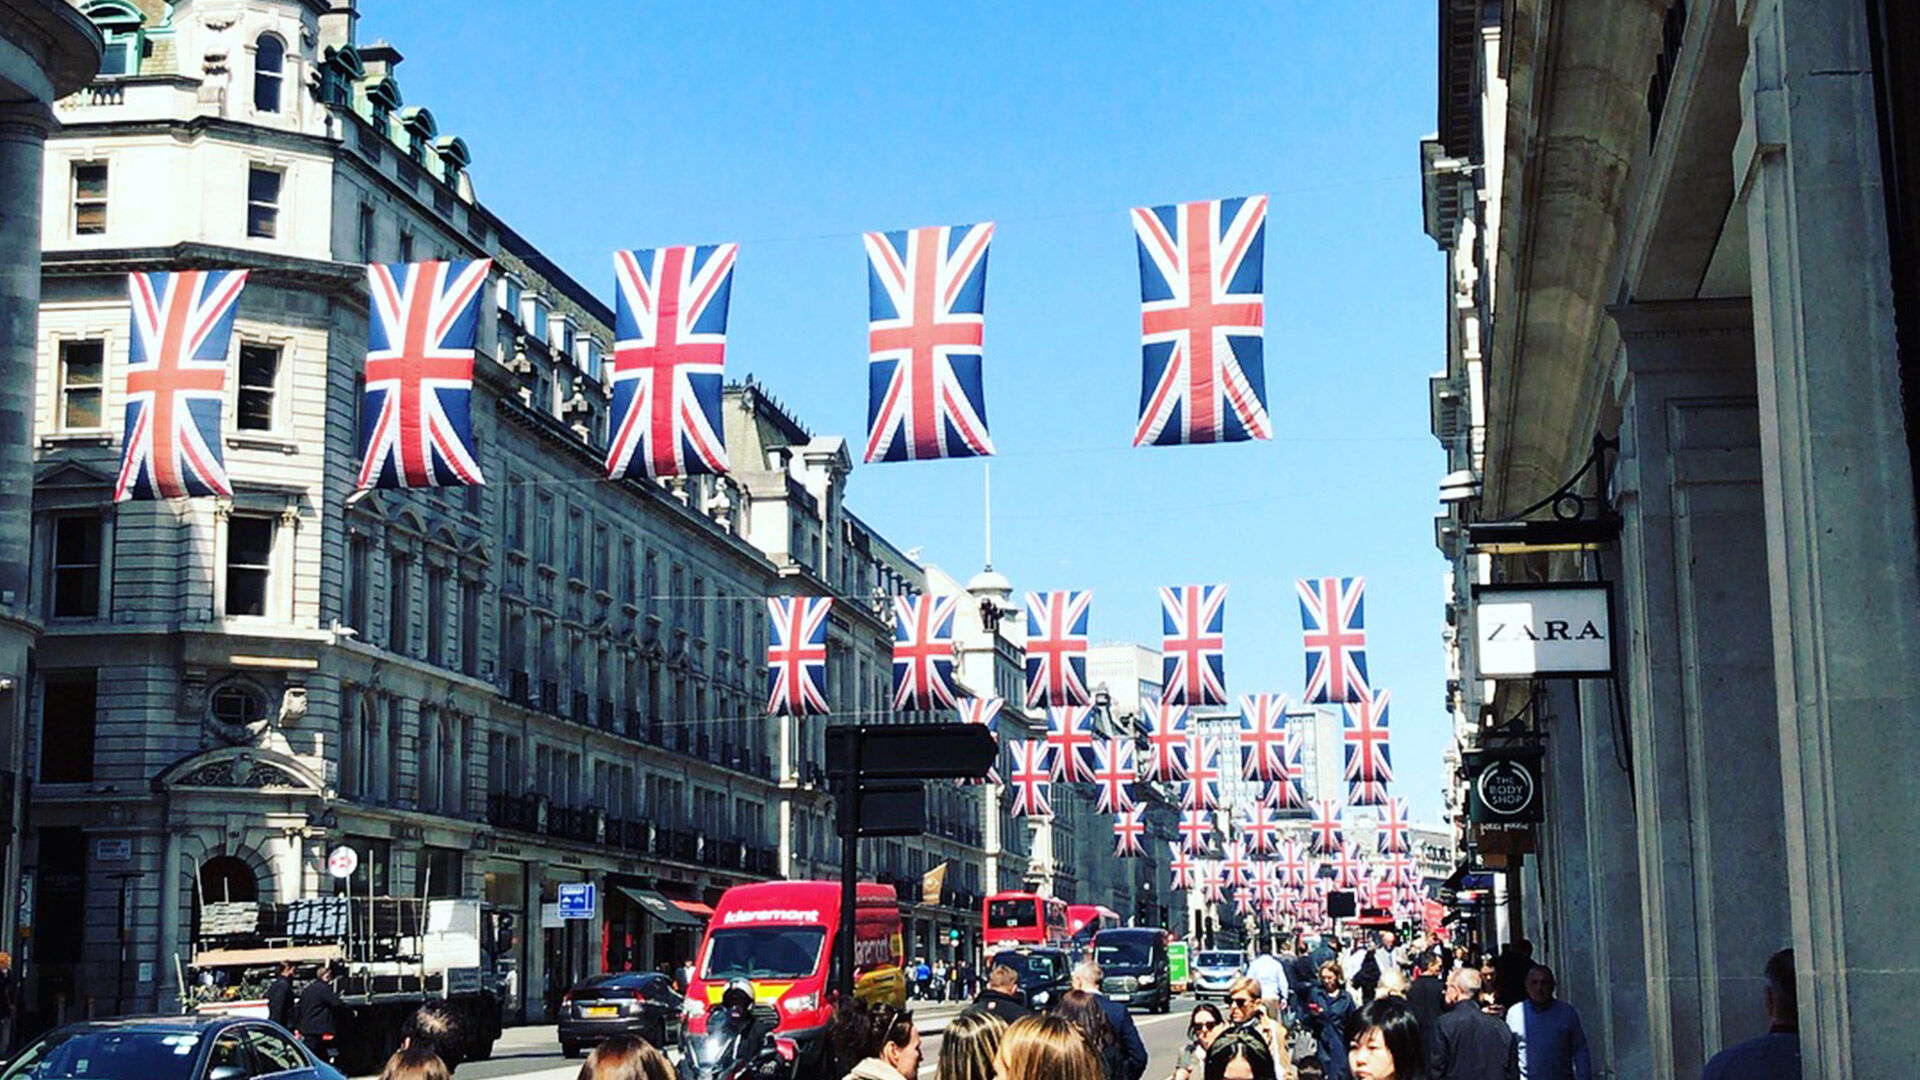 British flags adorn a bustling London street, indicating a celebration or national event, under a clear blue sky.